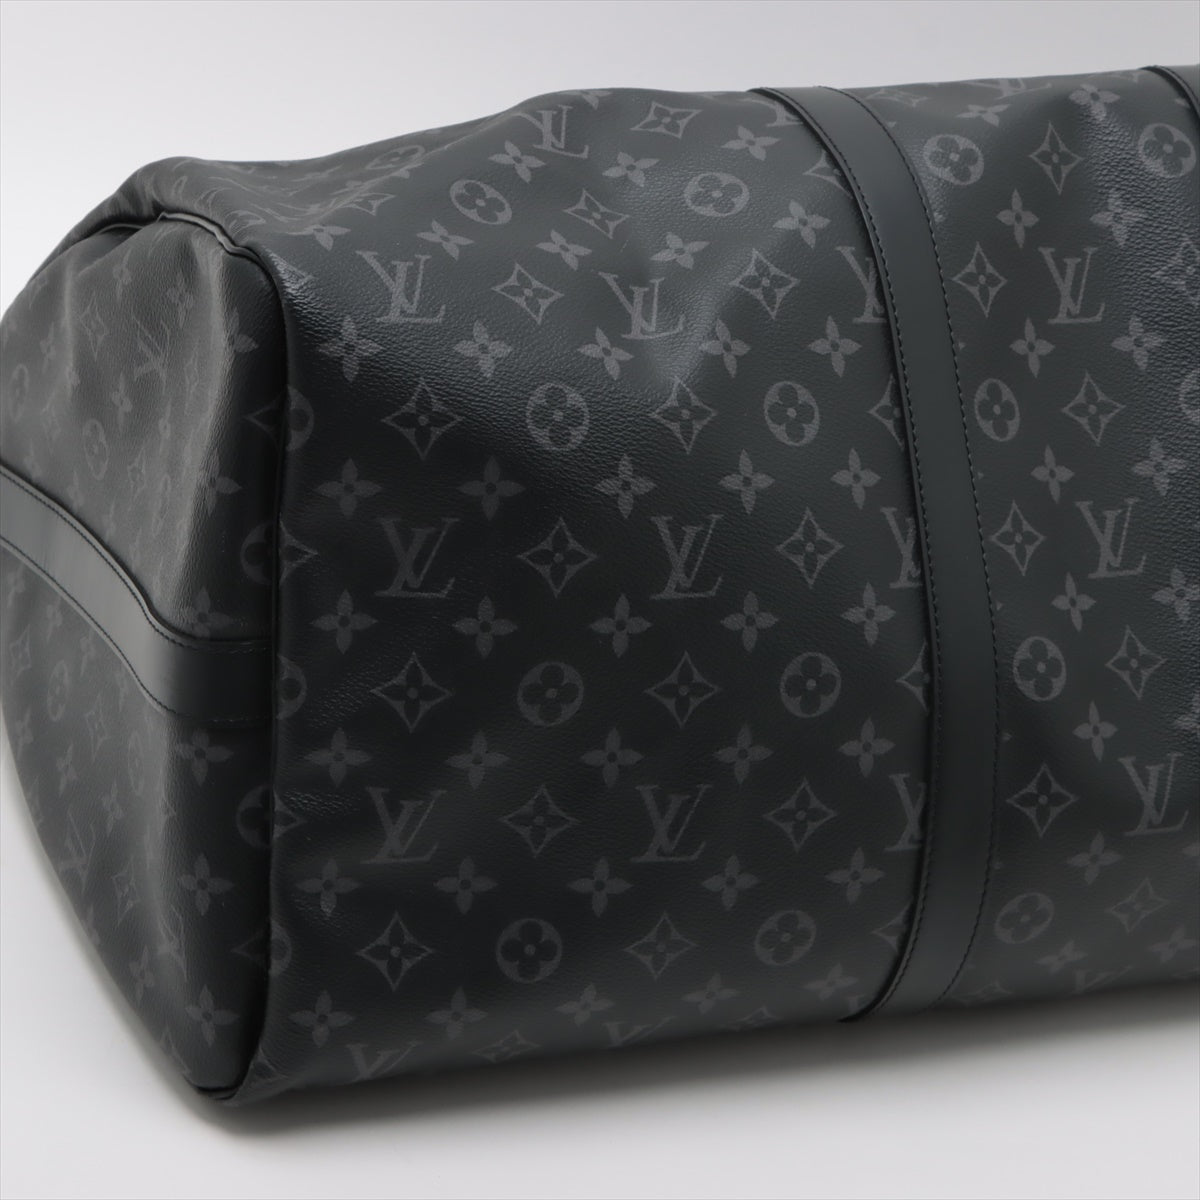 Louis Vuitton Monogram Eclipse Keepall Bandrière 55 M40605 There was an RFID response